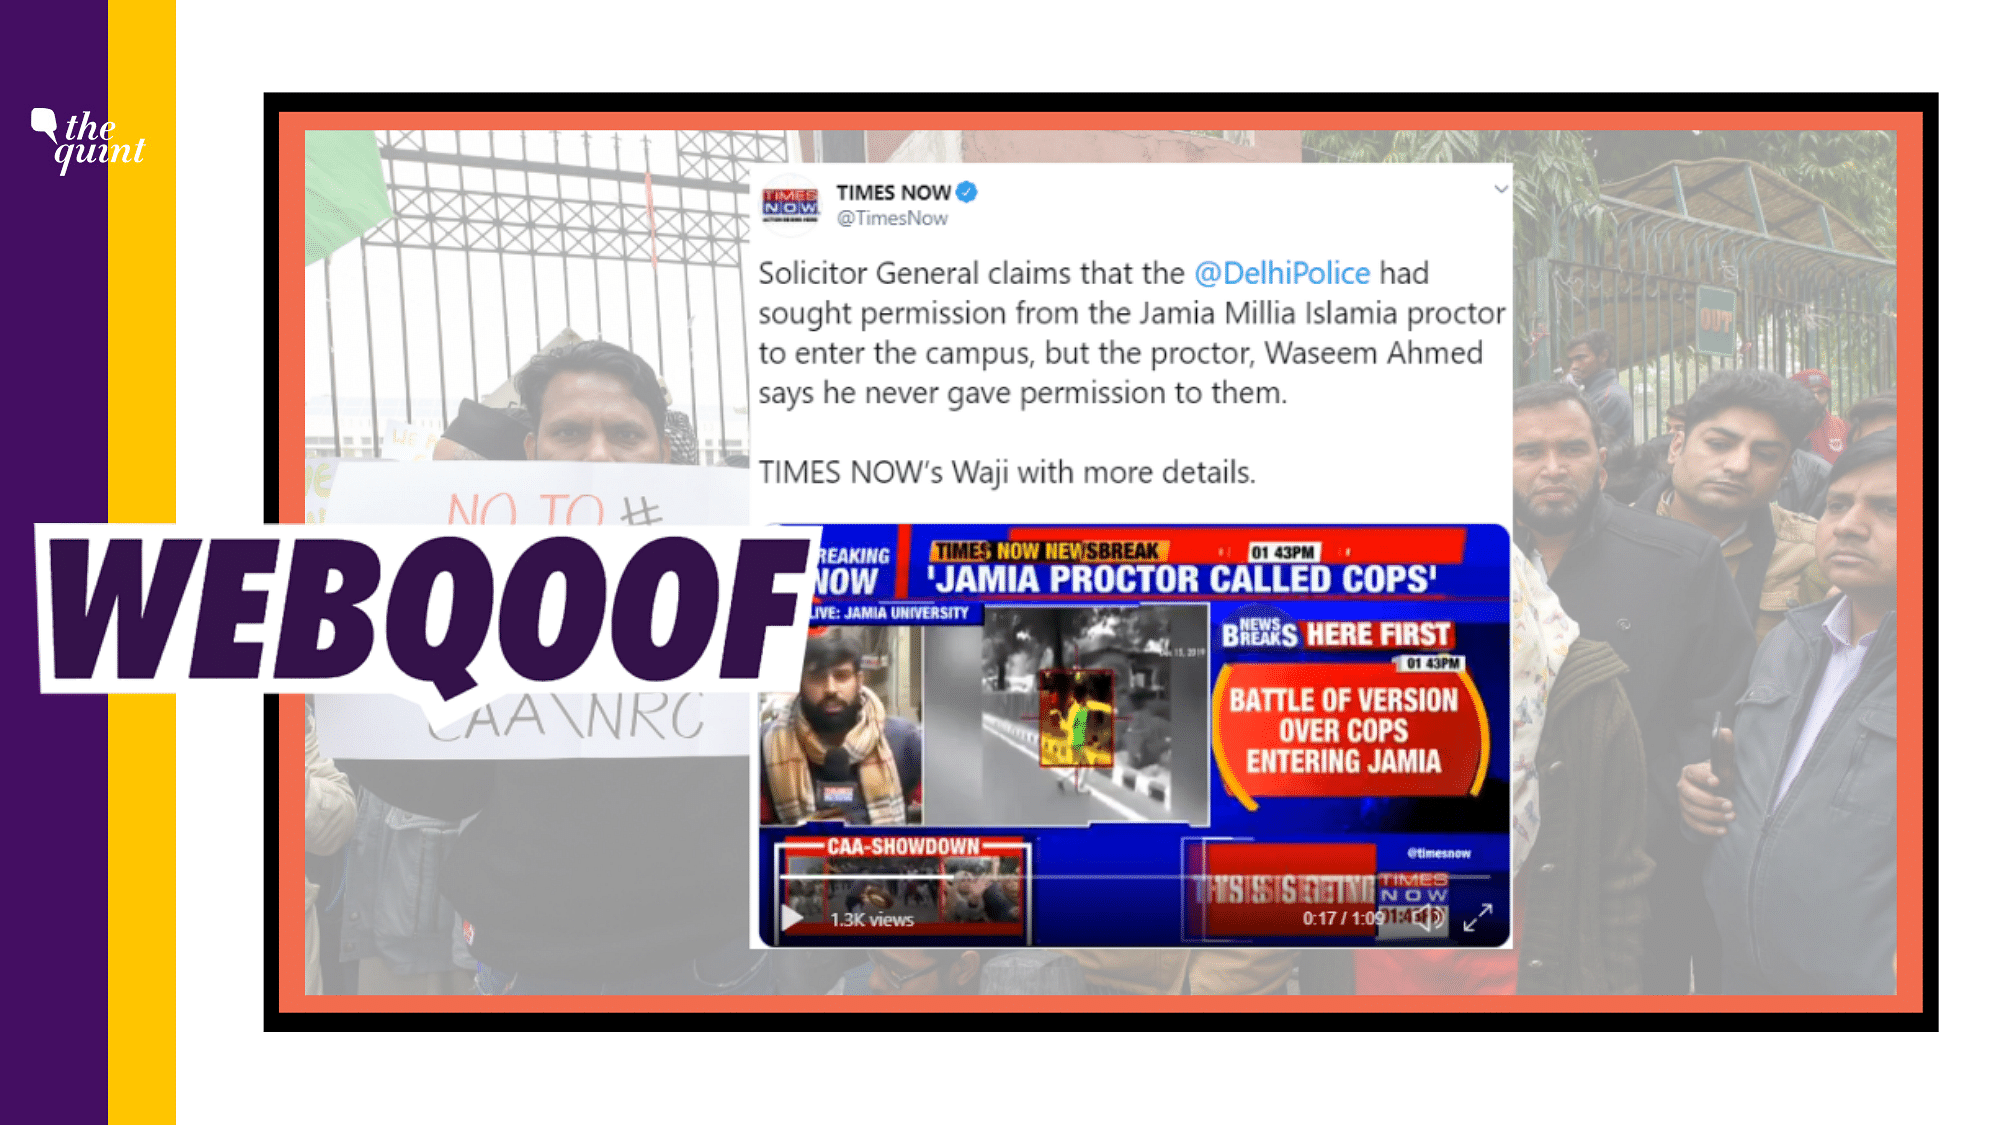 Media outlets misreported that Solicitor General Tushar Mehta said that Jamia proctor had permitted Delhi police to enter the university campus.